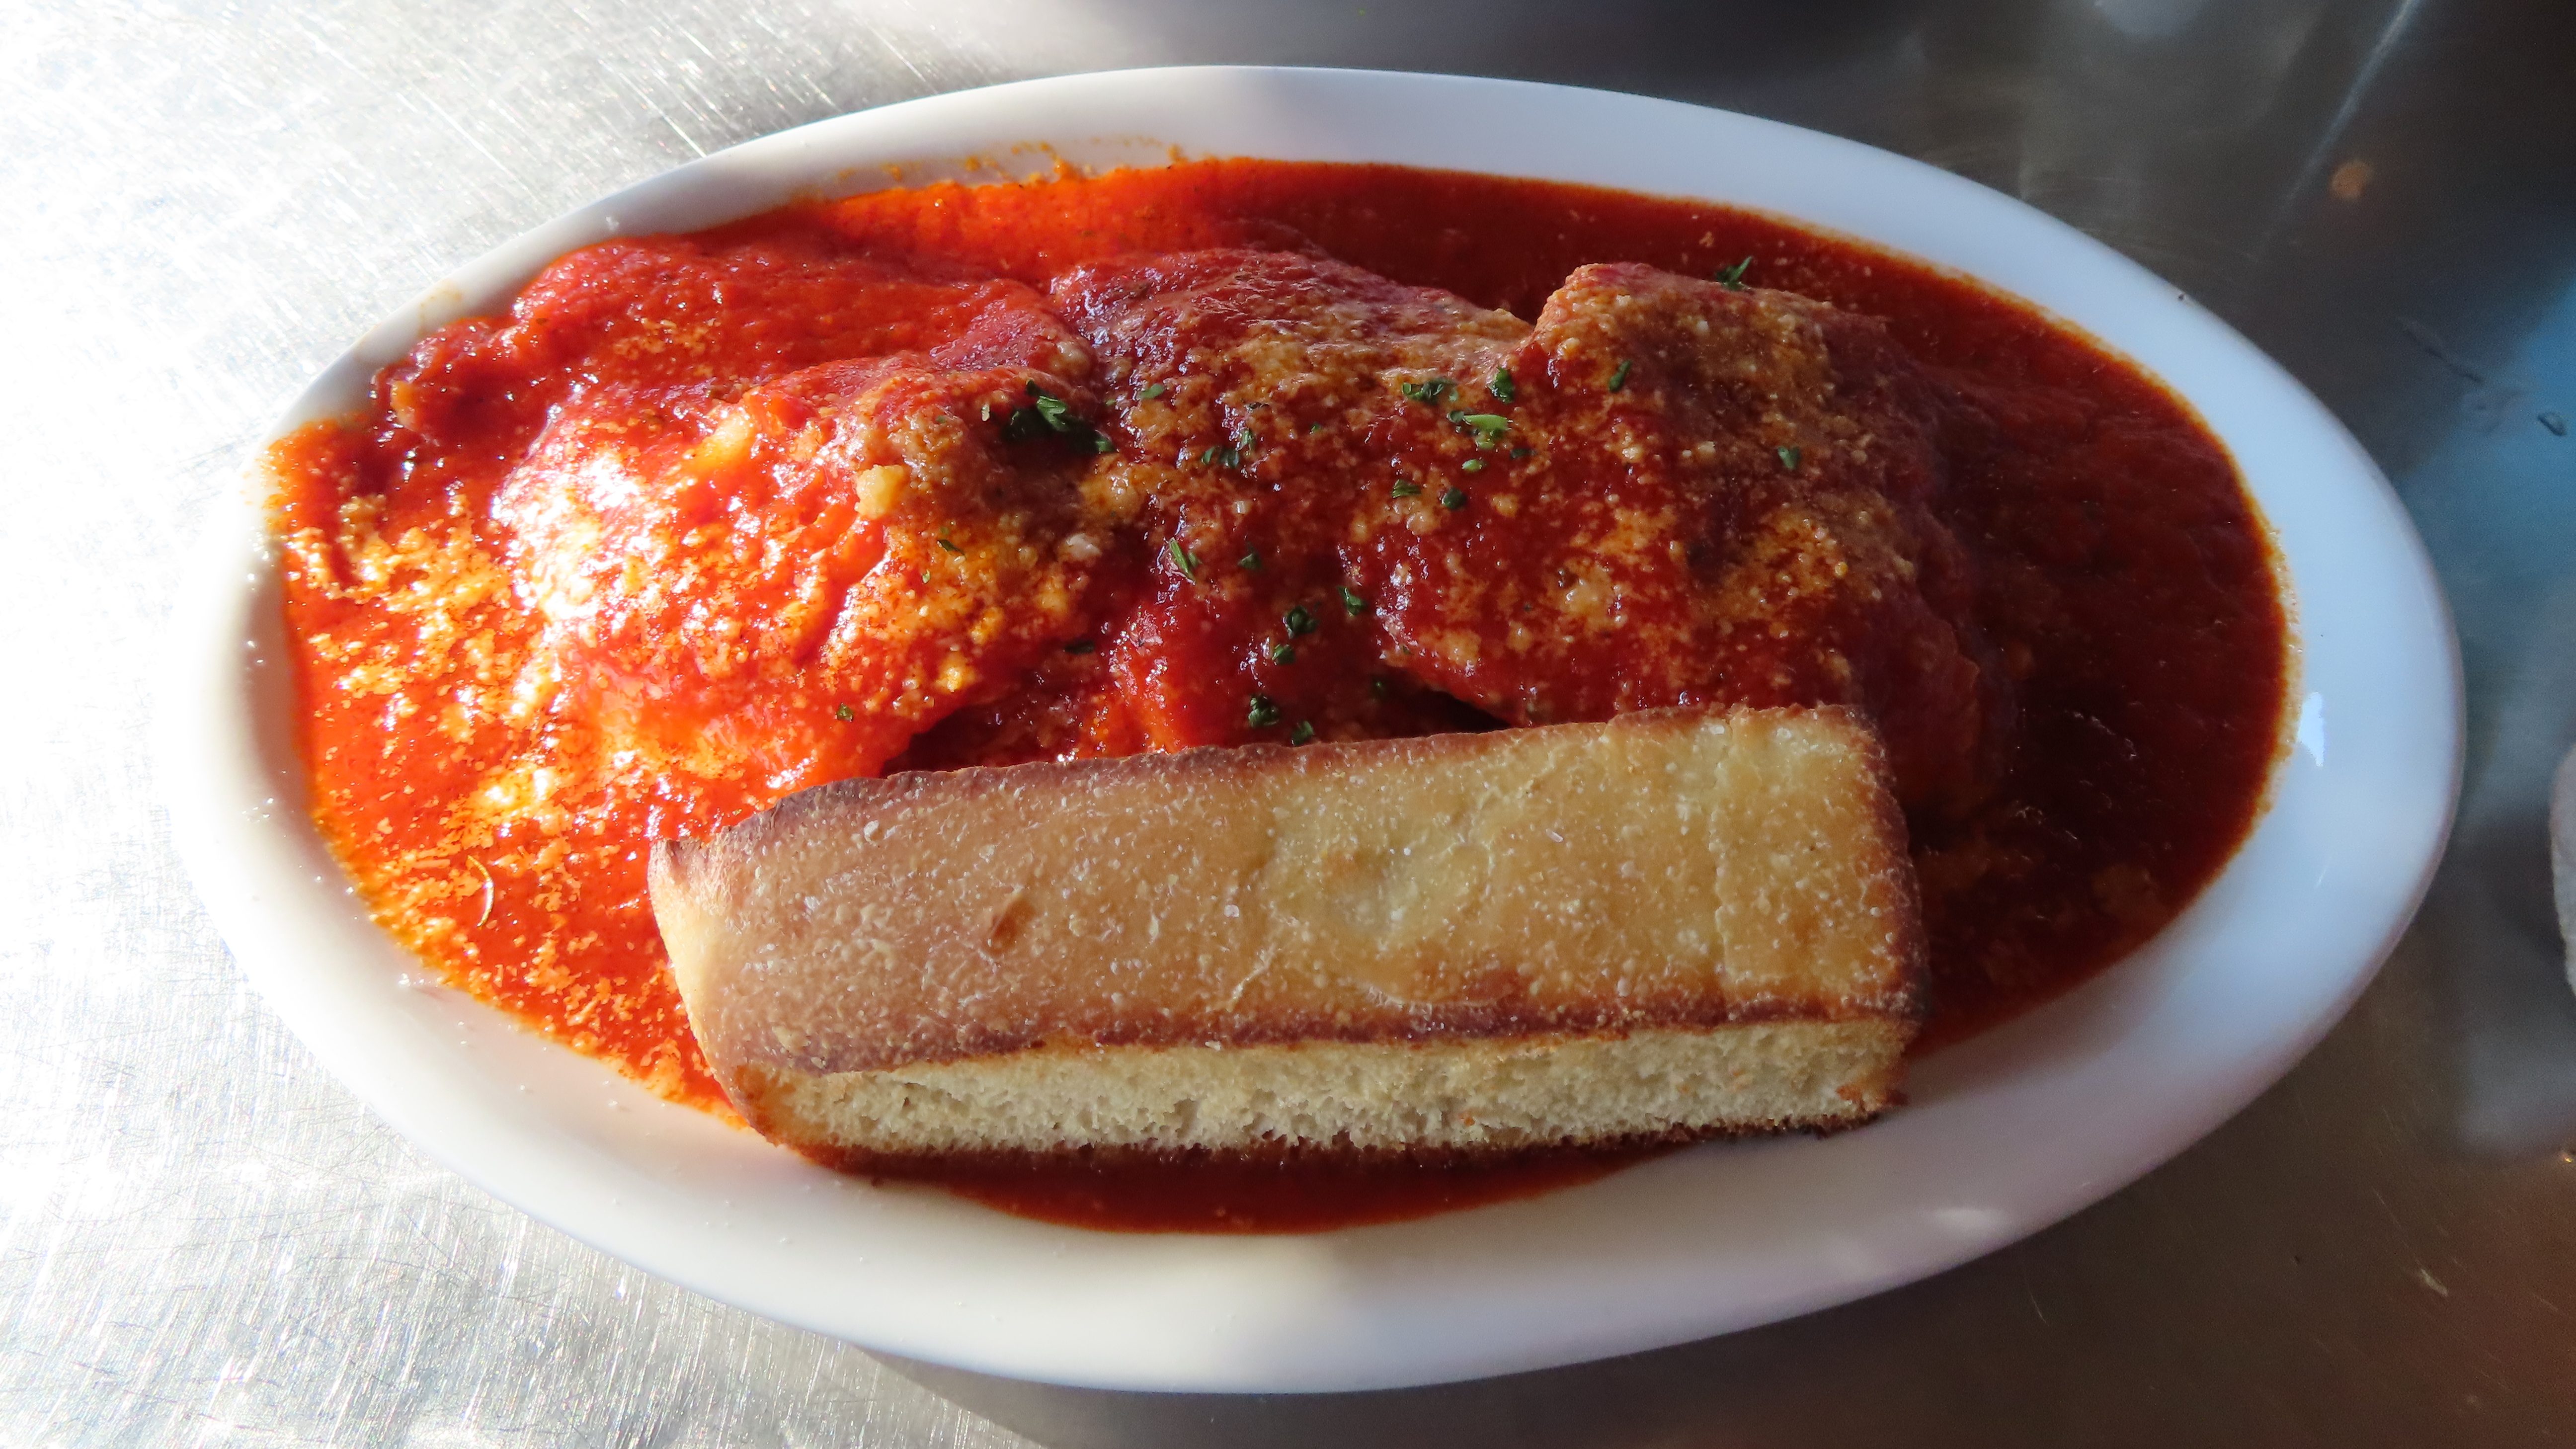 On a white plat are four large cheese ravioli smothered in a tomato gravy sauce with a piece of their toasted country bread. Their is parmesan melted on top and flakes of parsley. The ravioli looks precariously piled on one another before we dug in.